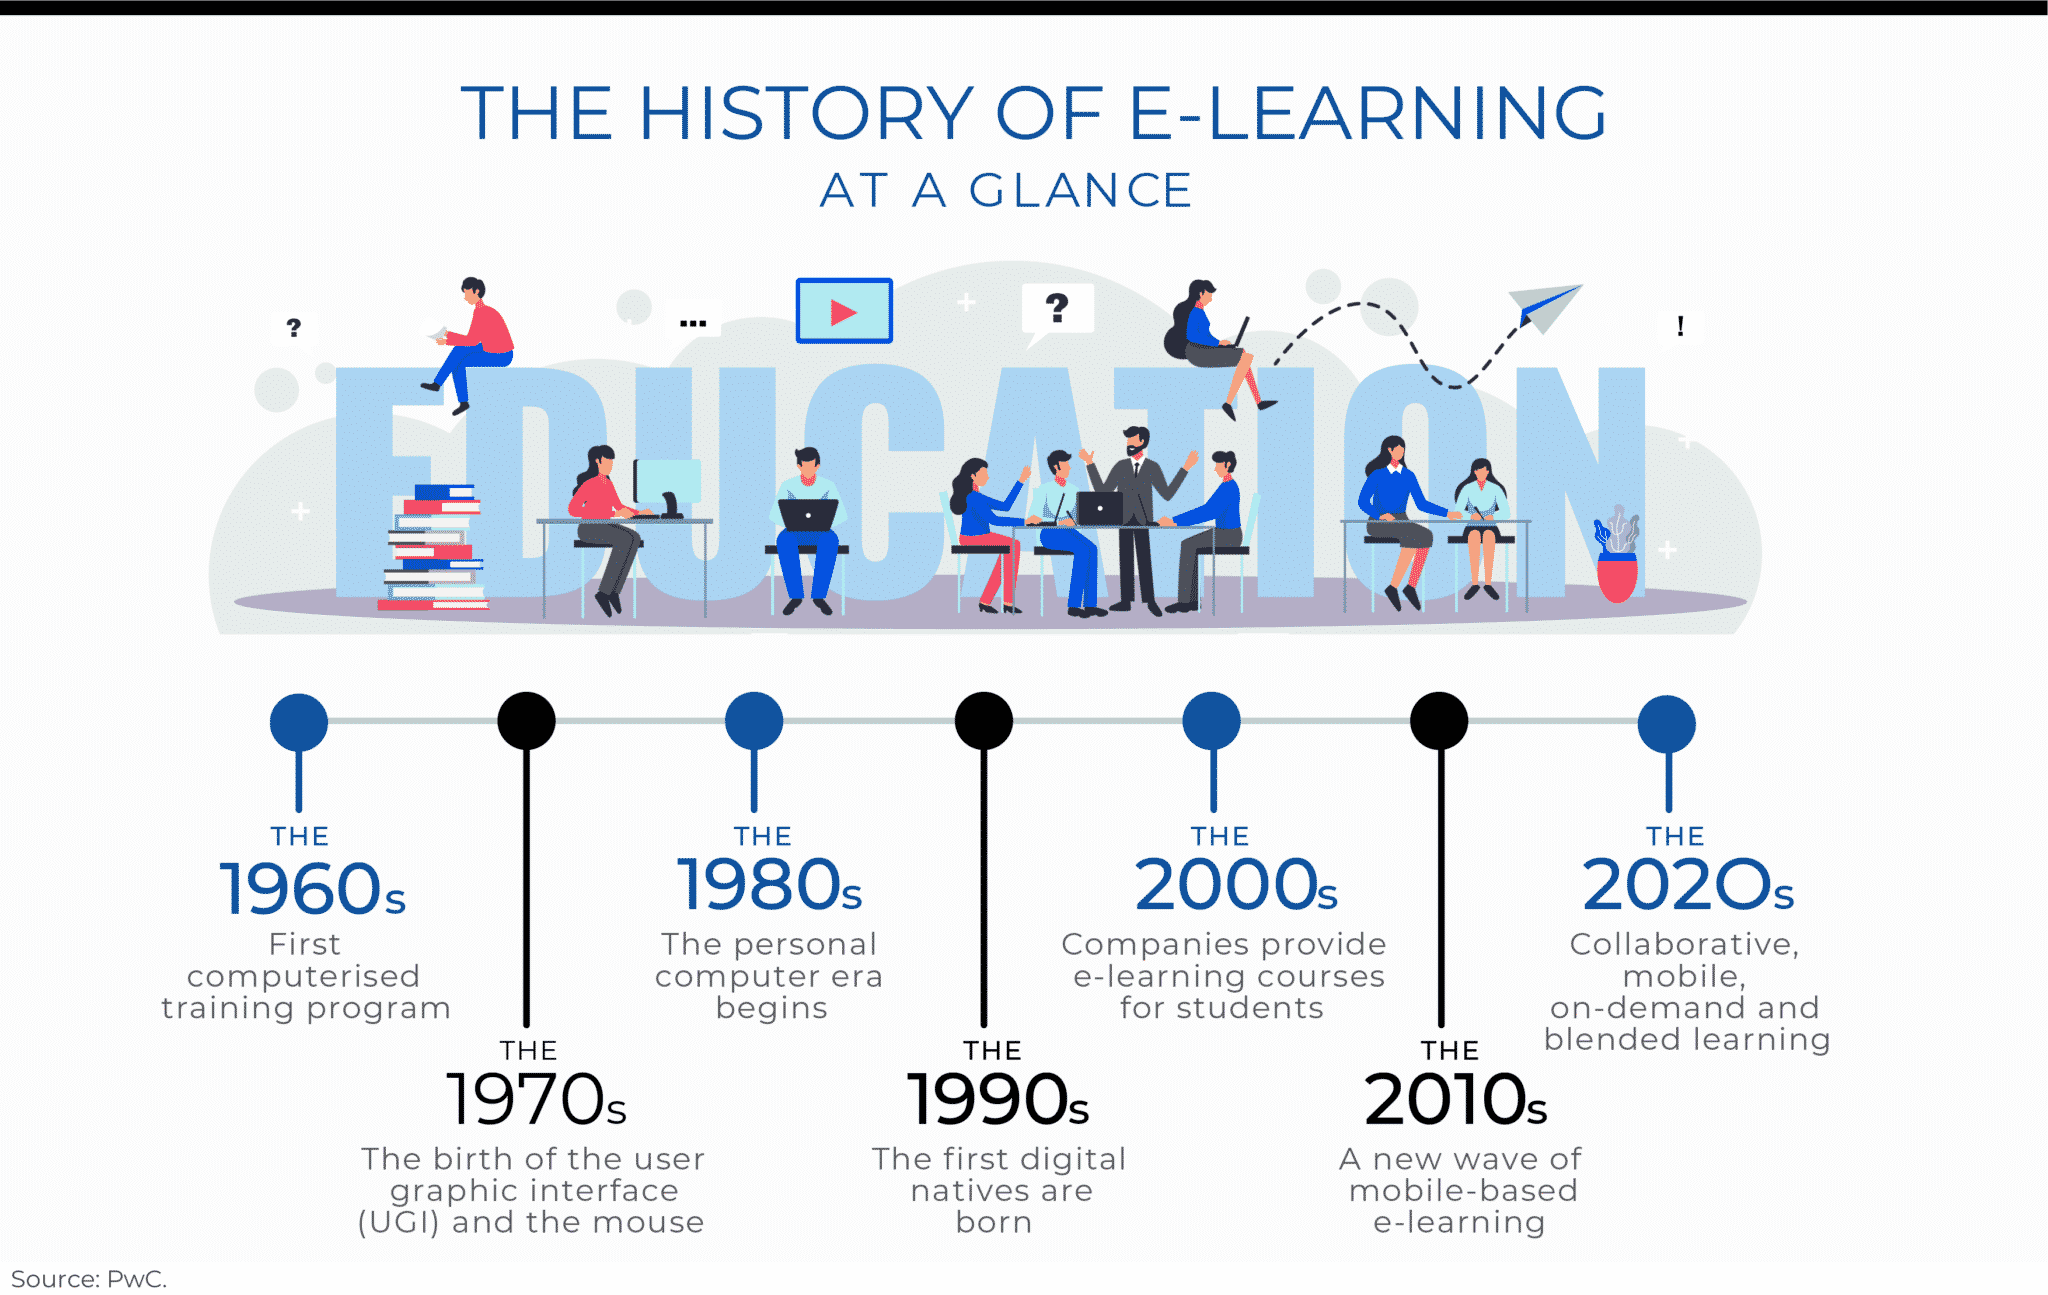 THE HISTORY OF E-LEARNING